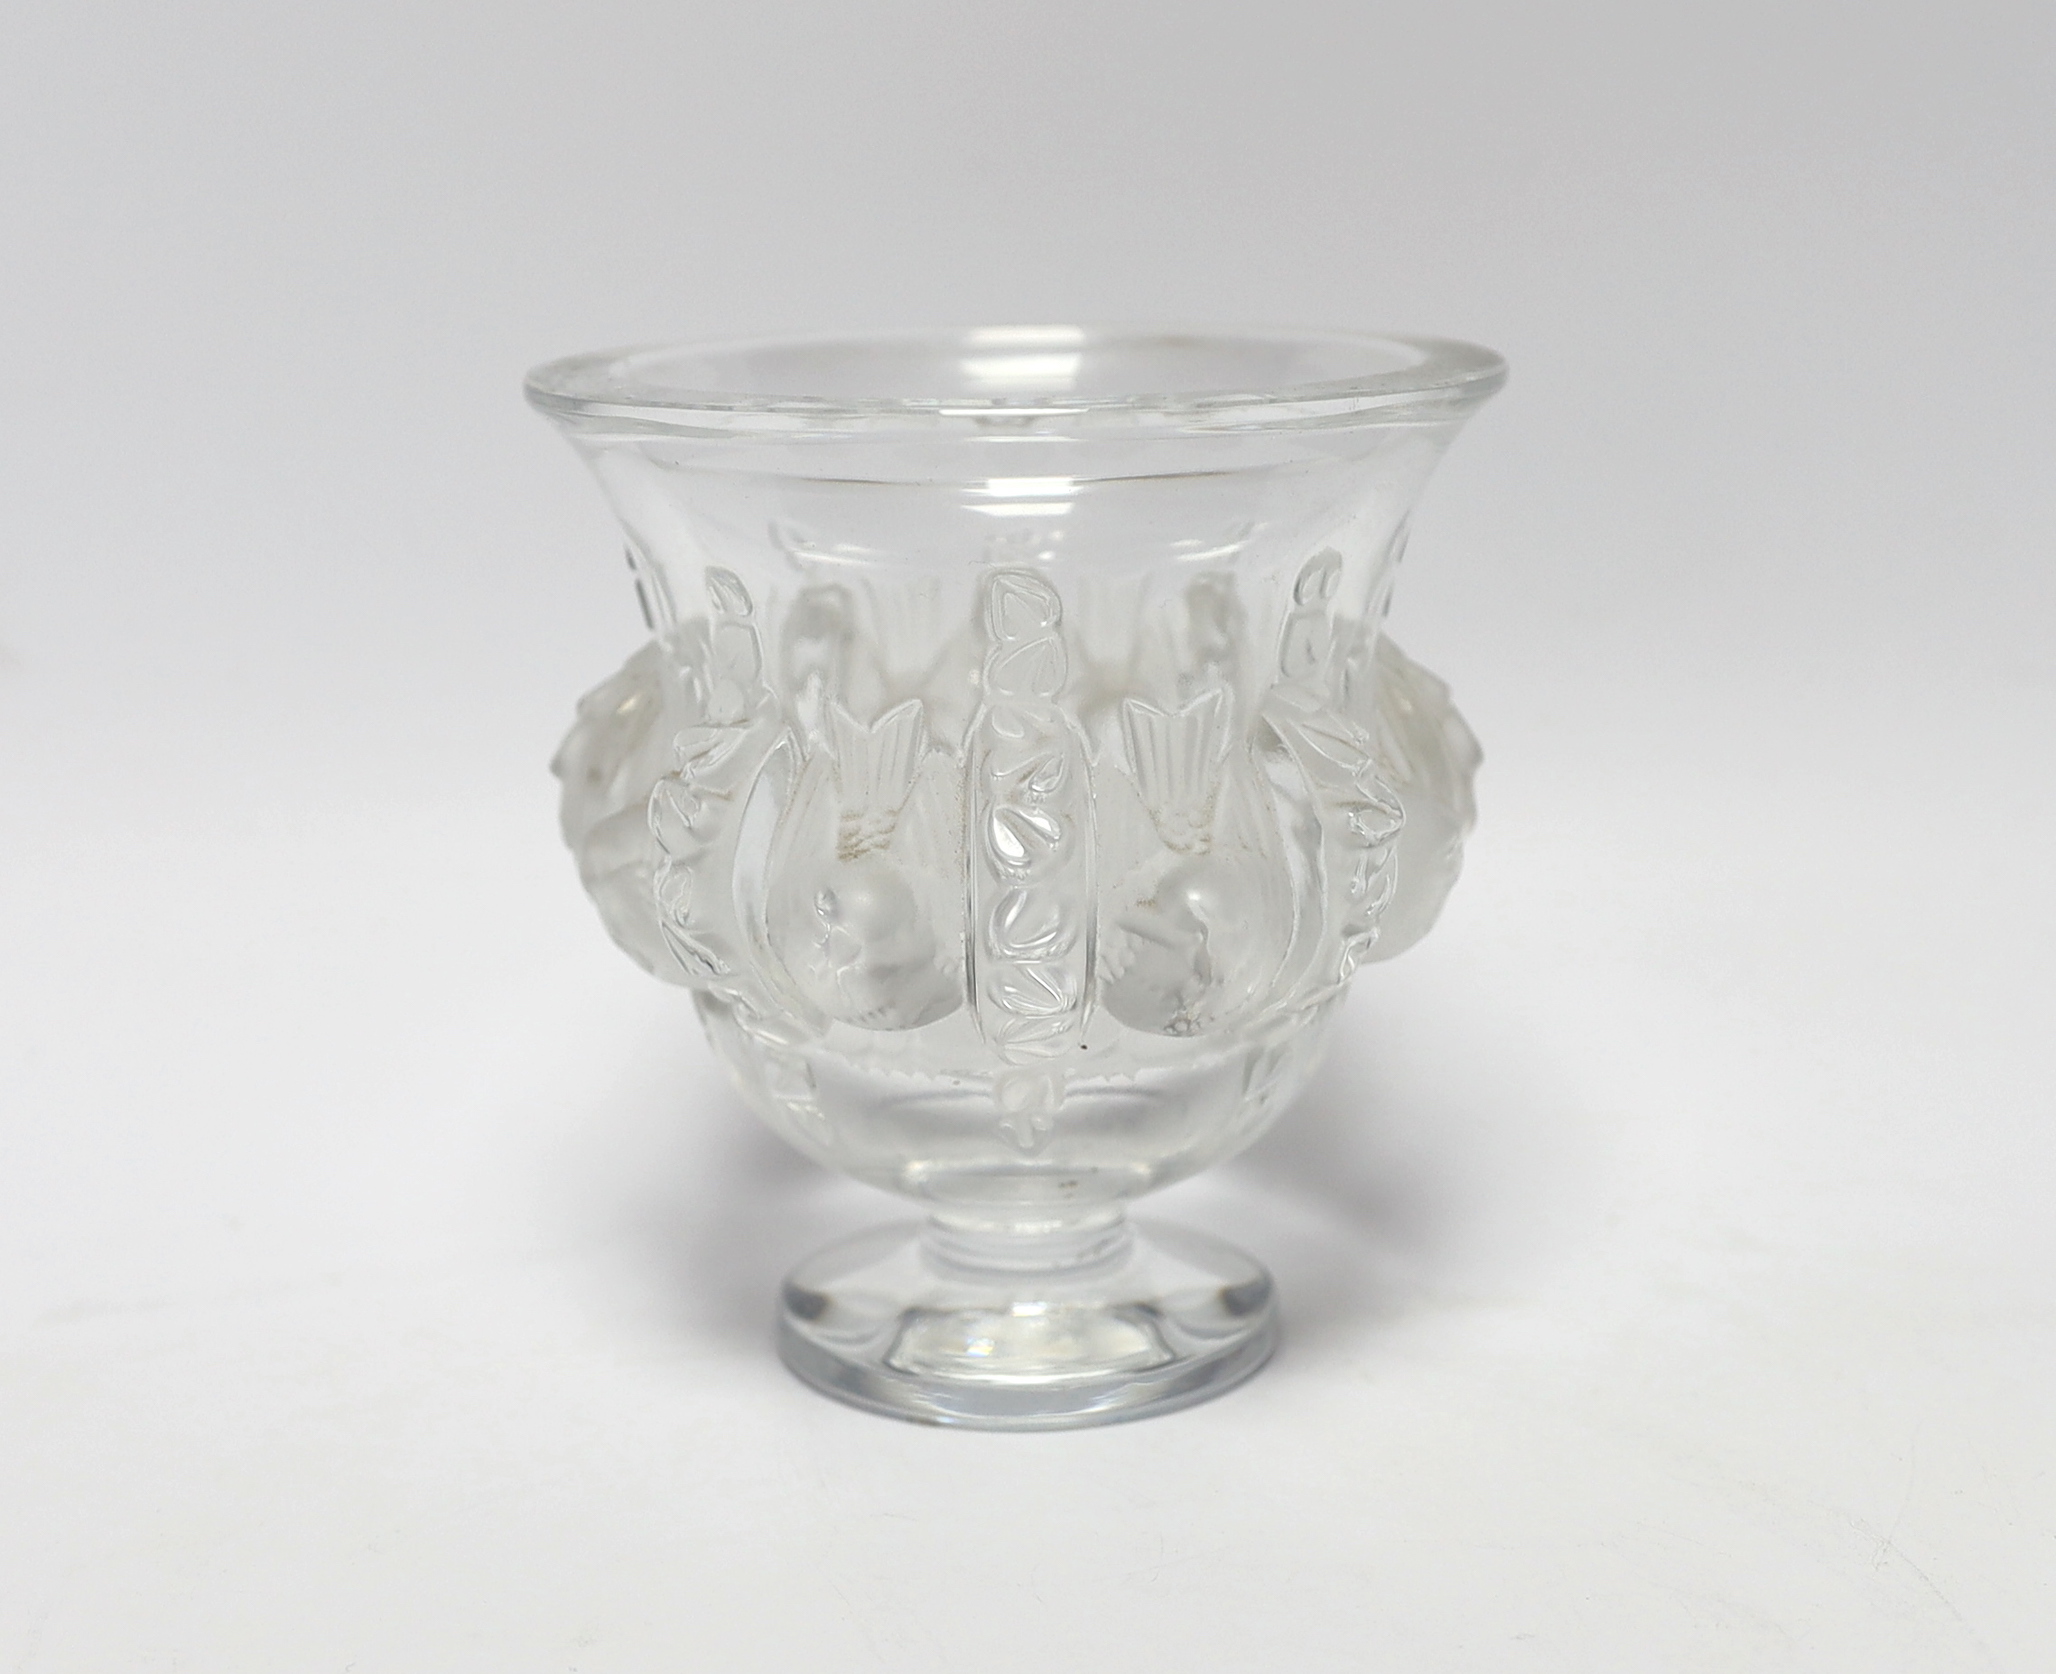 A later 20th century Lalique glass pedestal vase decorated in the Dampierre pattern, engraved signature ‘CM Lalique’, 13cm